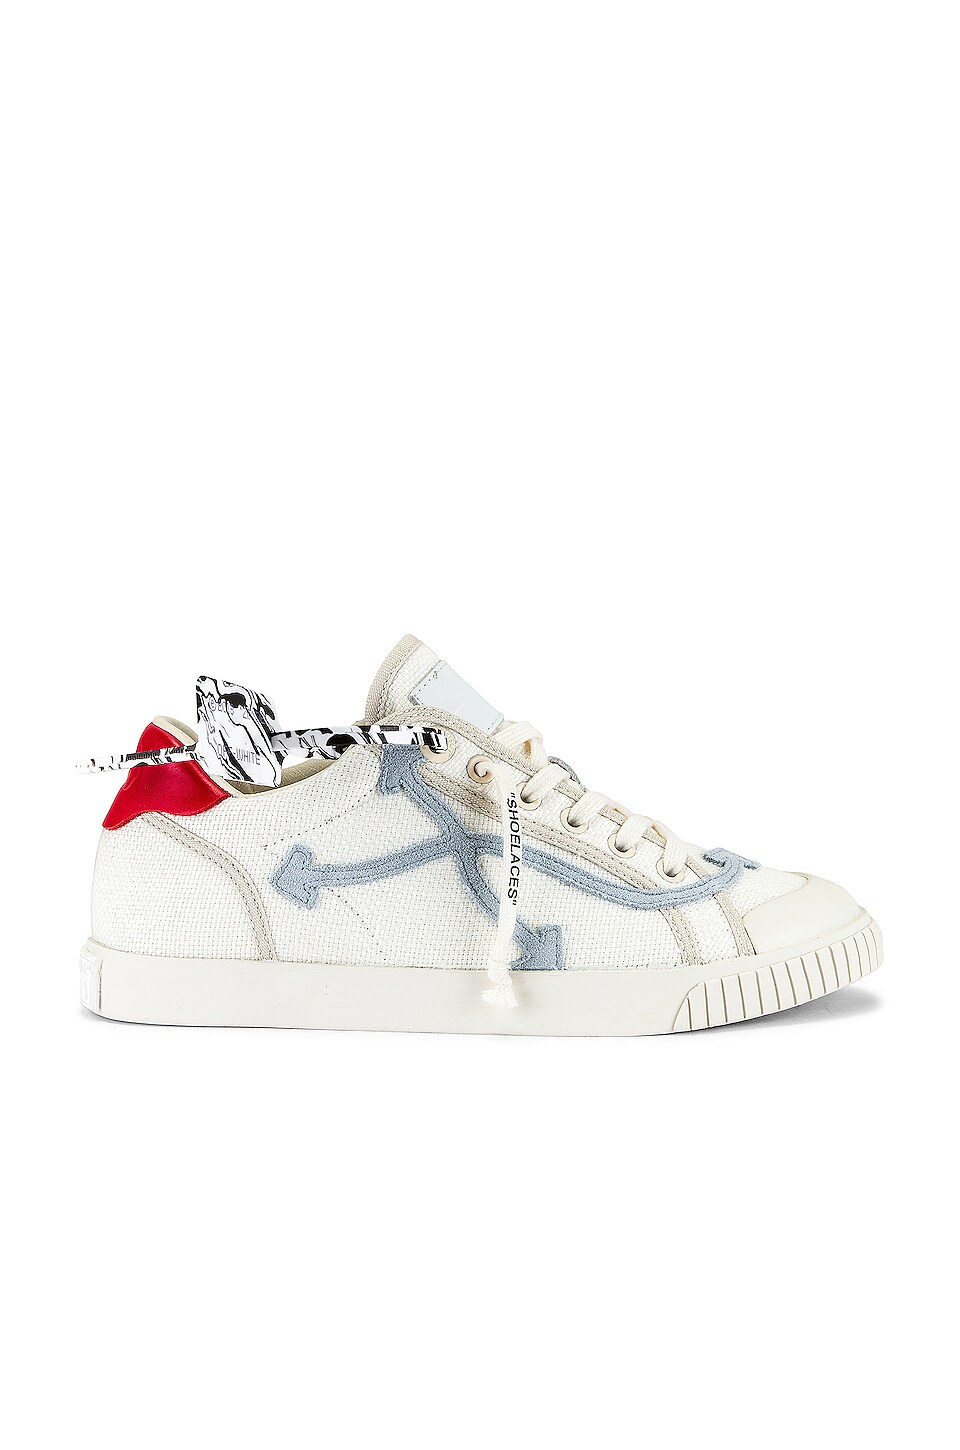 OFF-WHITE Low Vulcanized Canvas Sneakers in White & Light Blue 